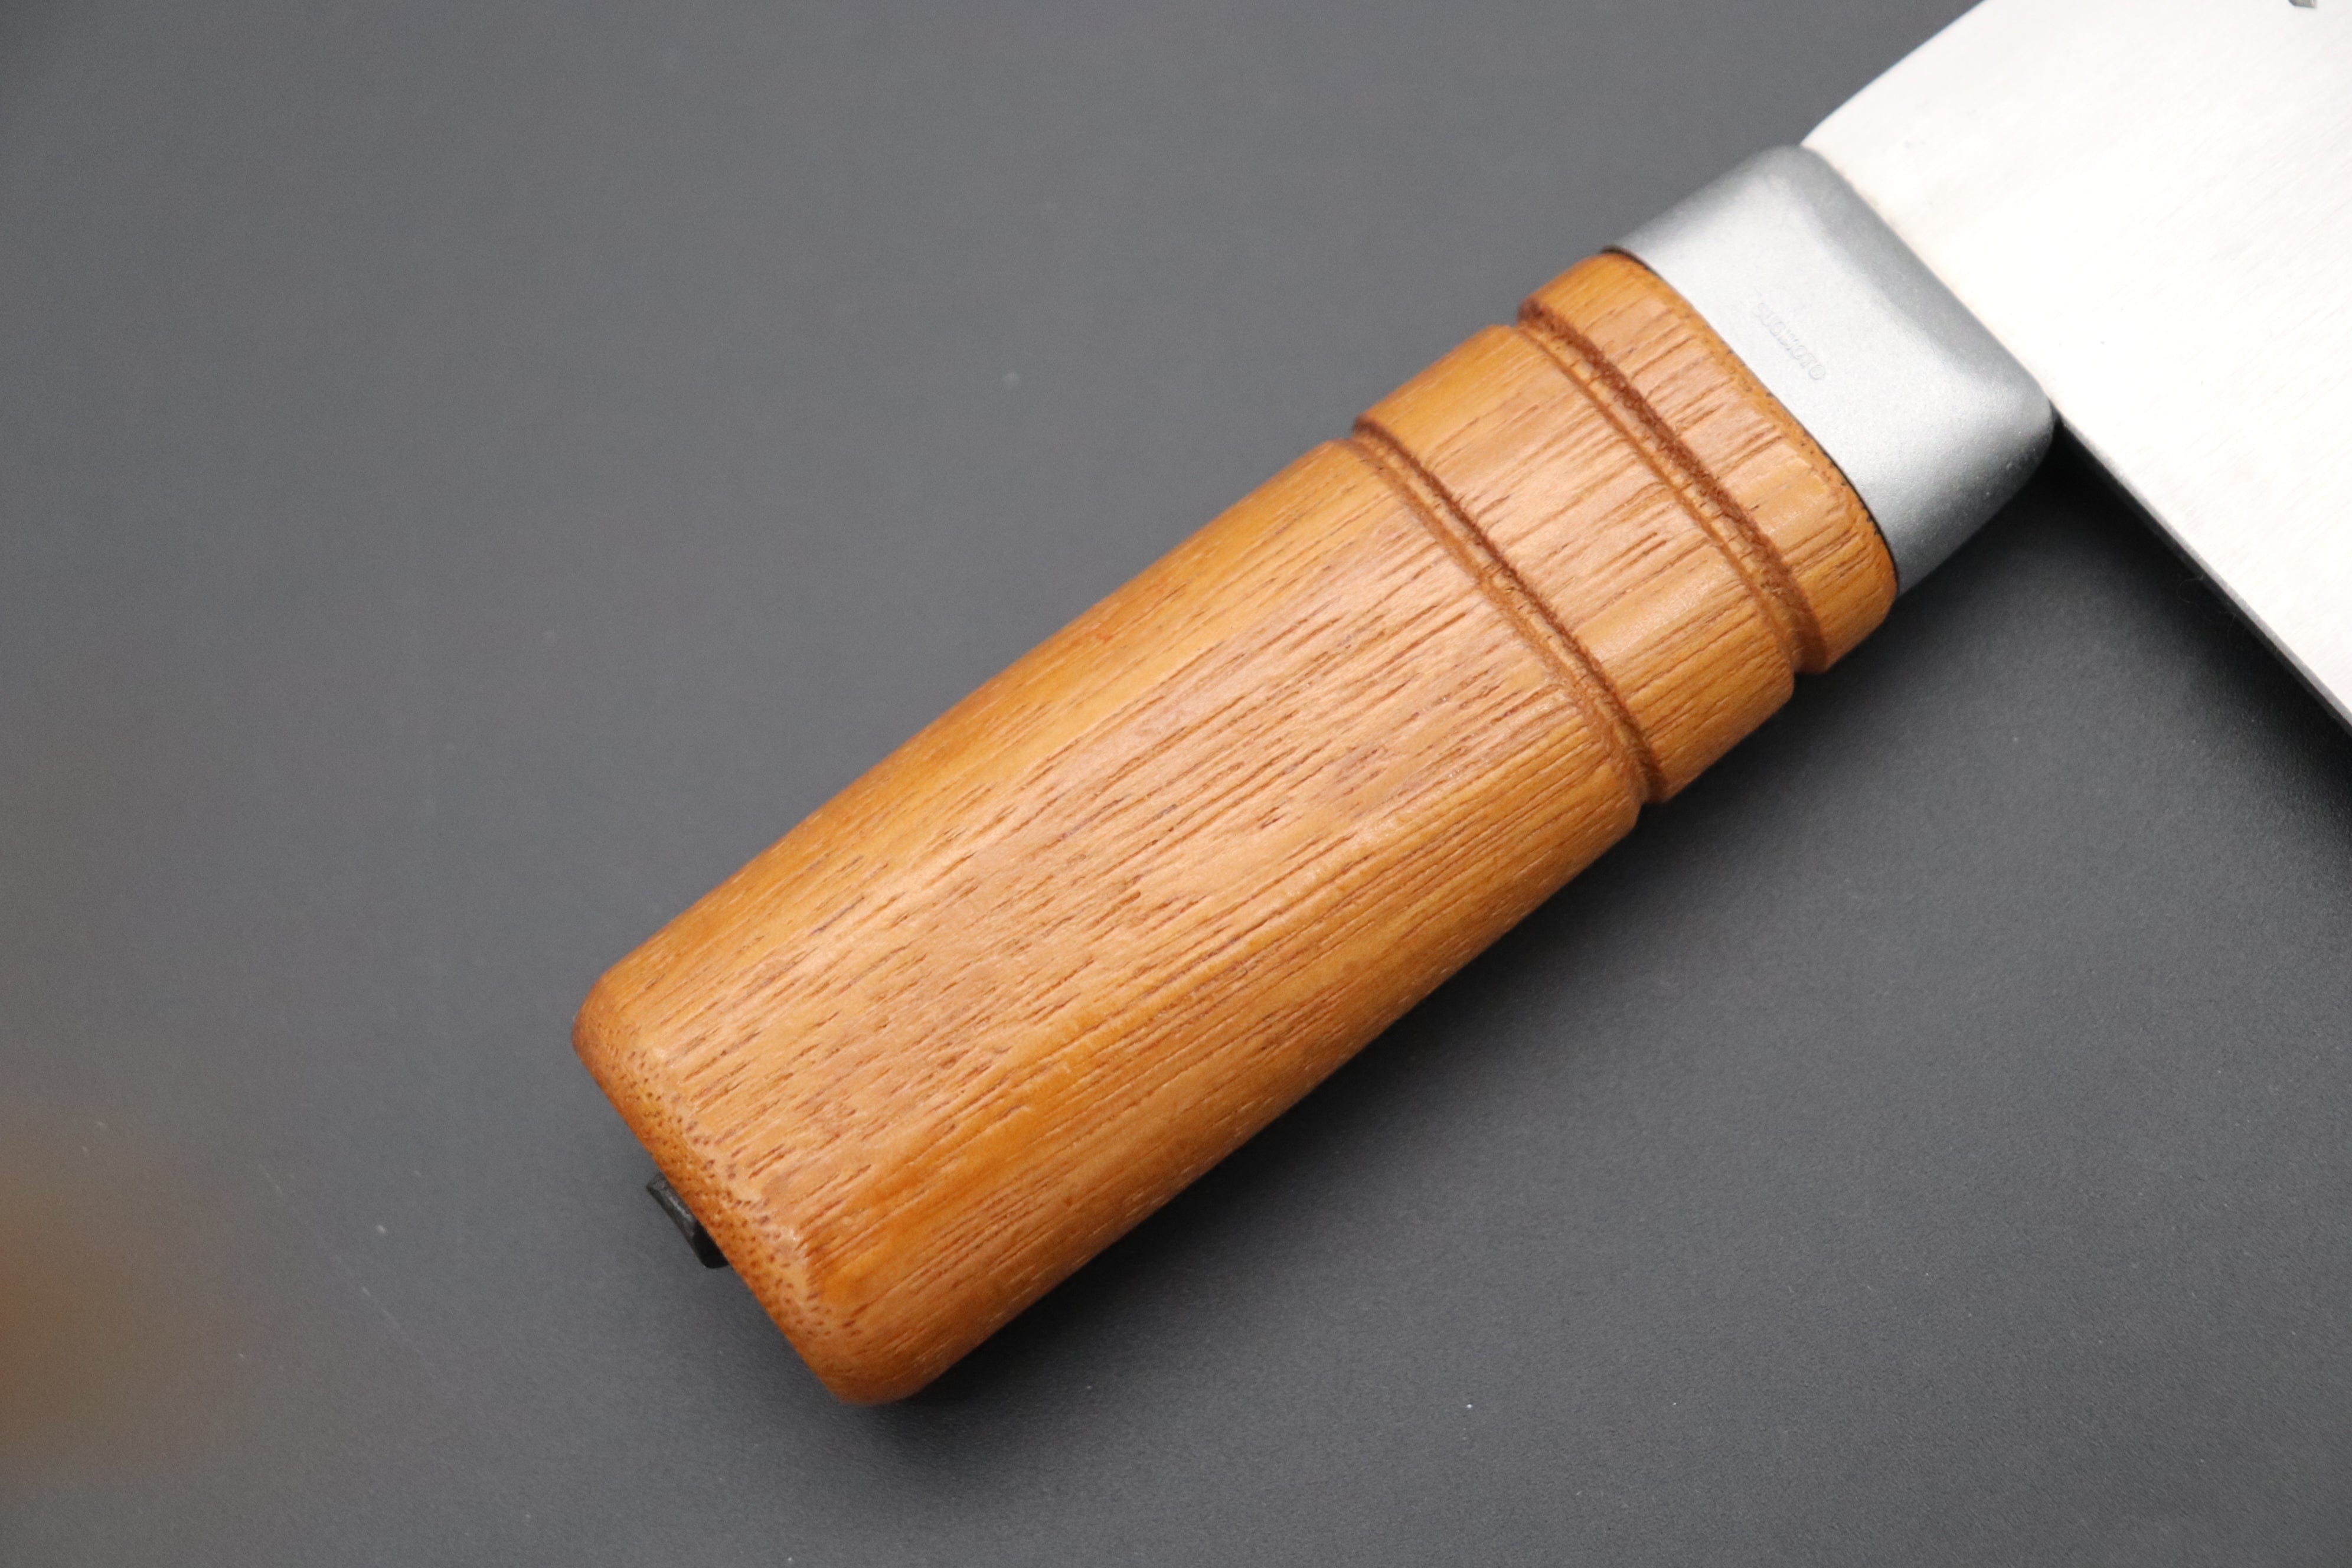 Fruit Knife with Sheath, natural